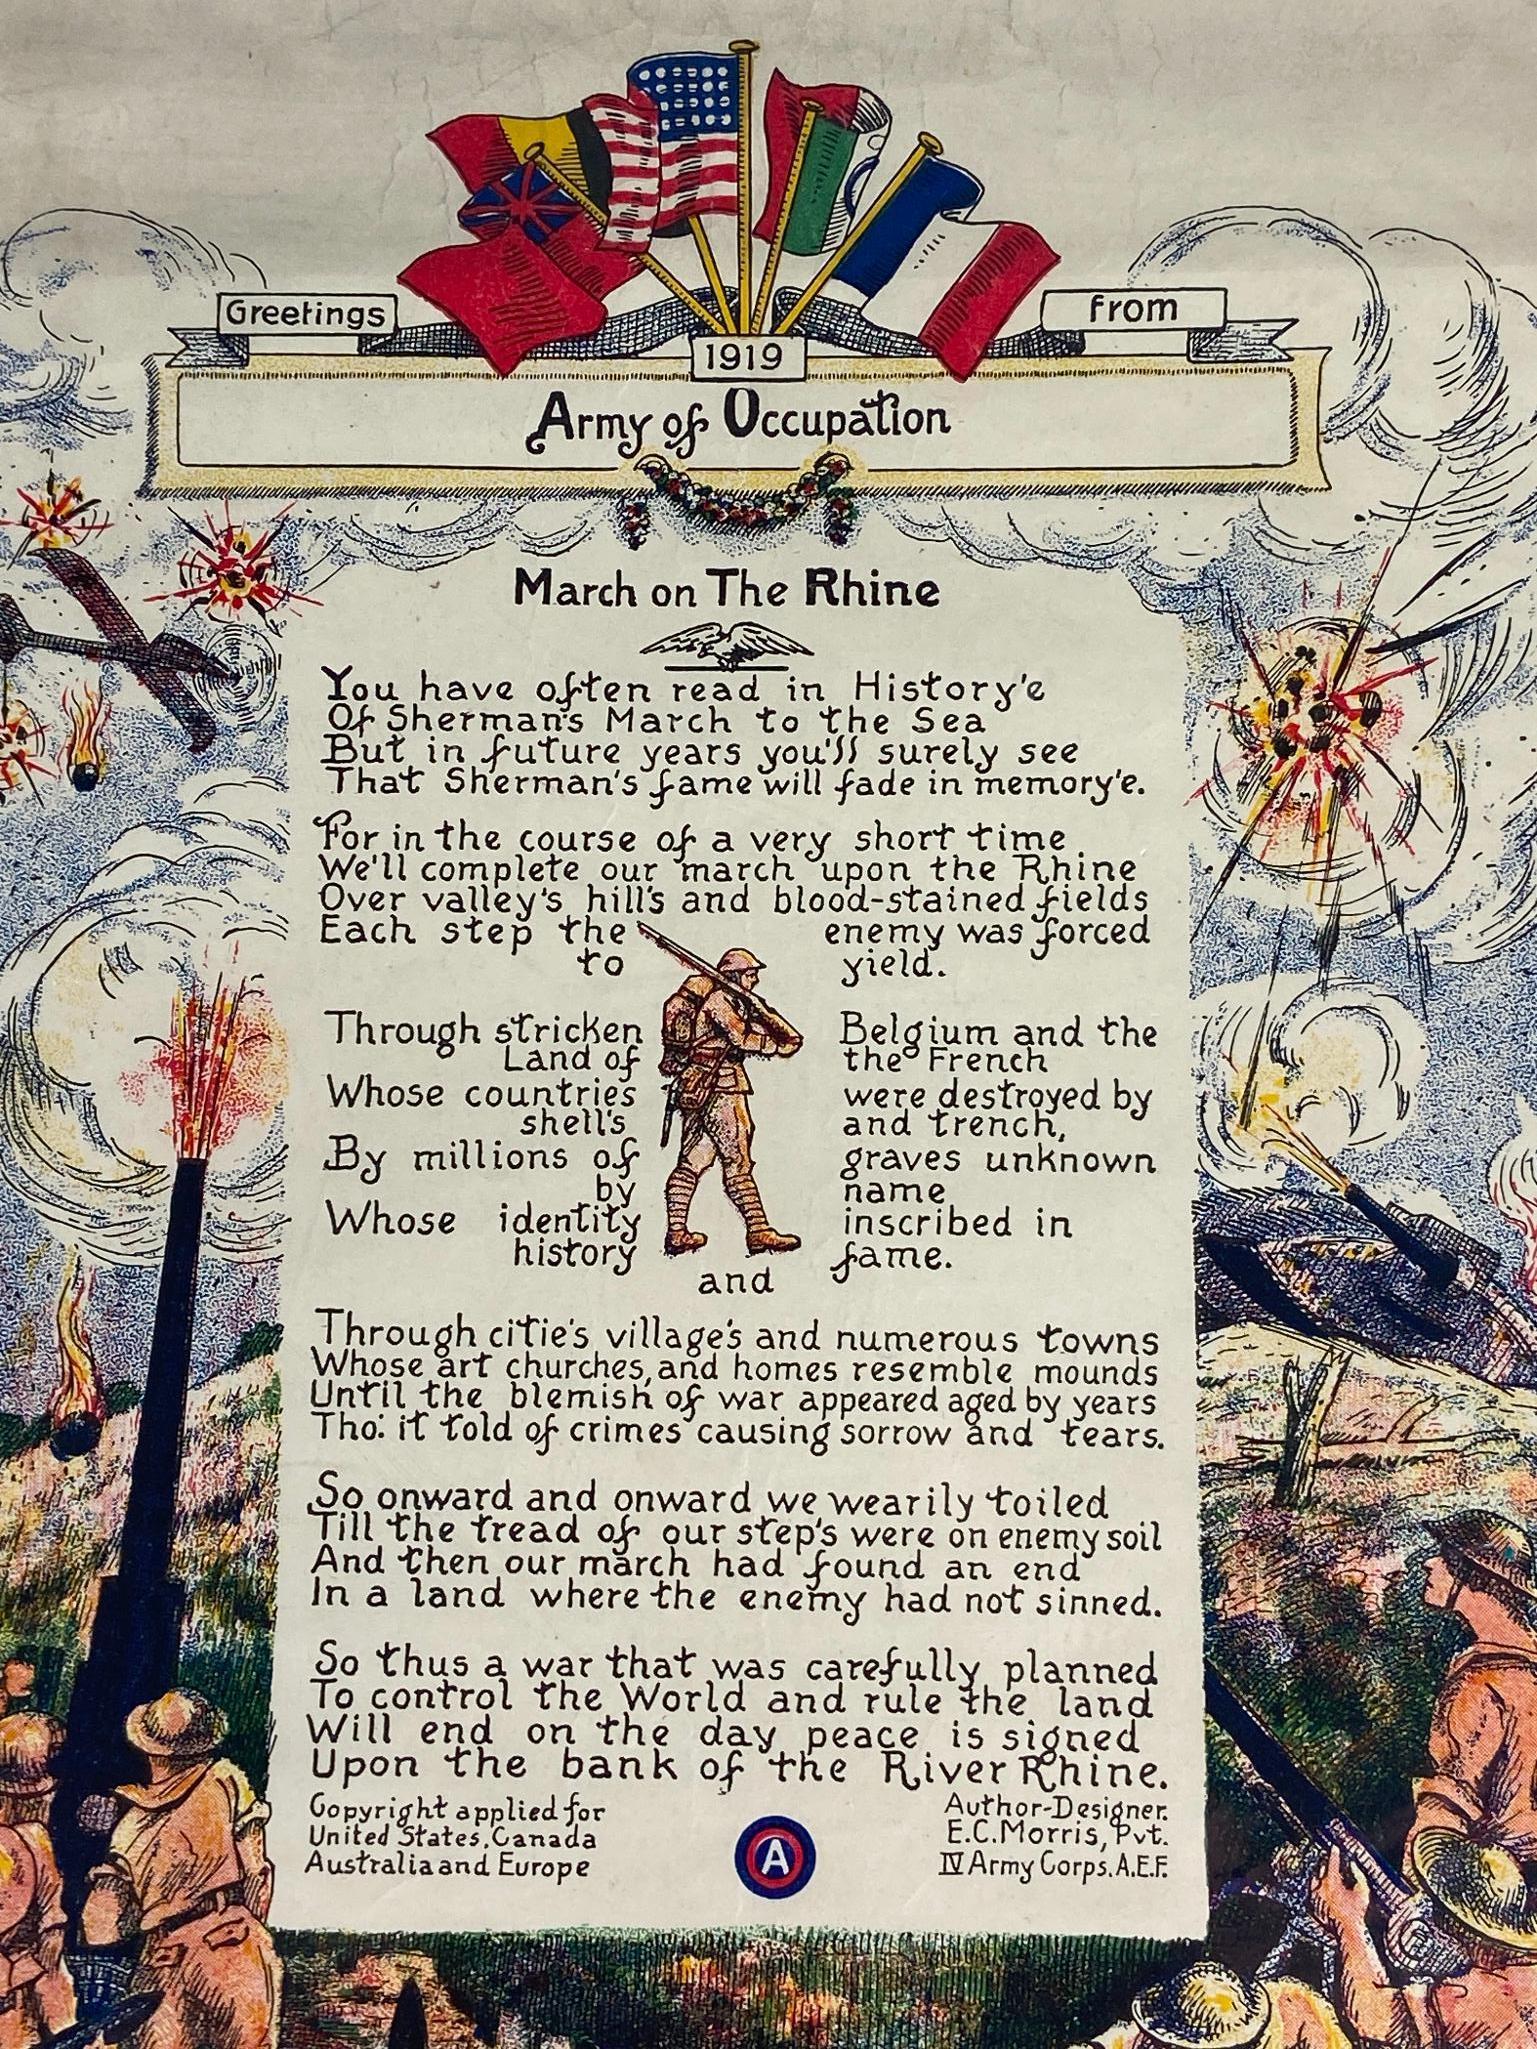 WWI BROADSIDE "GREETINGS FROM ARMY OF OCCUPATION"